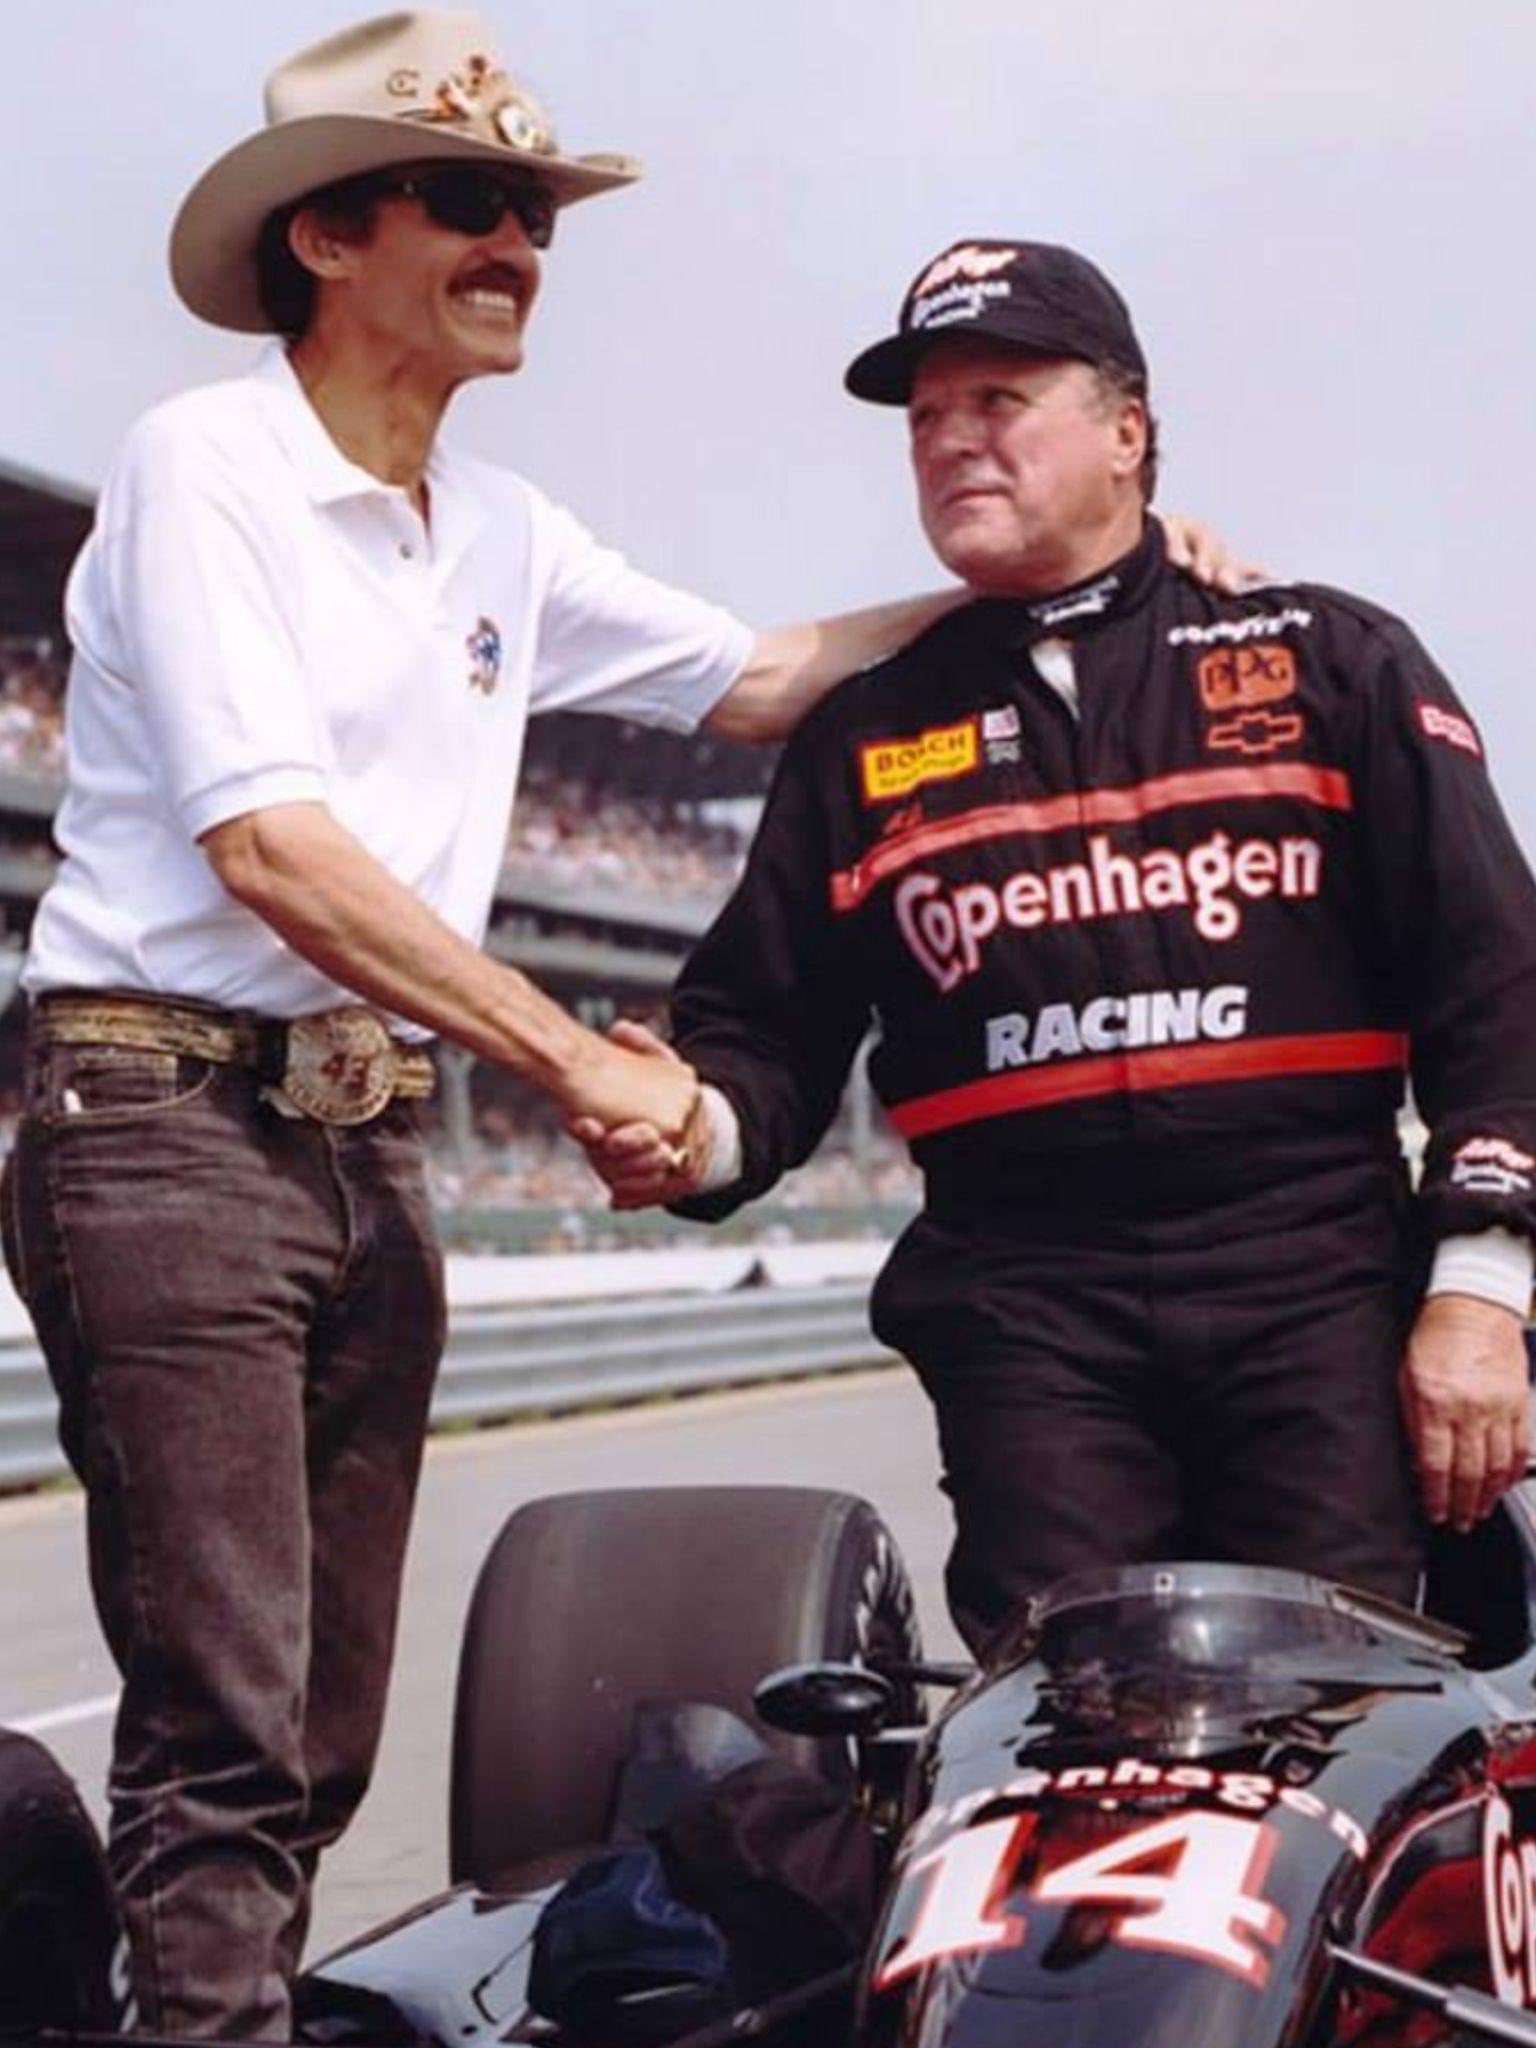 Happy birthday to auto racing legend and one of my favorite drivers of all time AJ Foyt. 